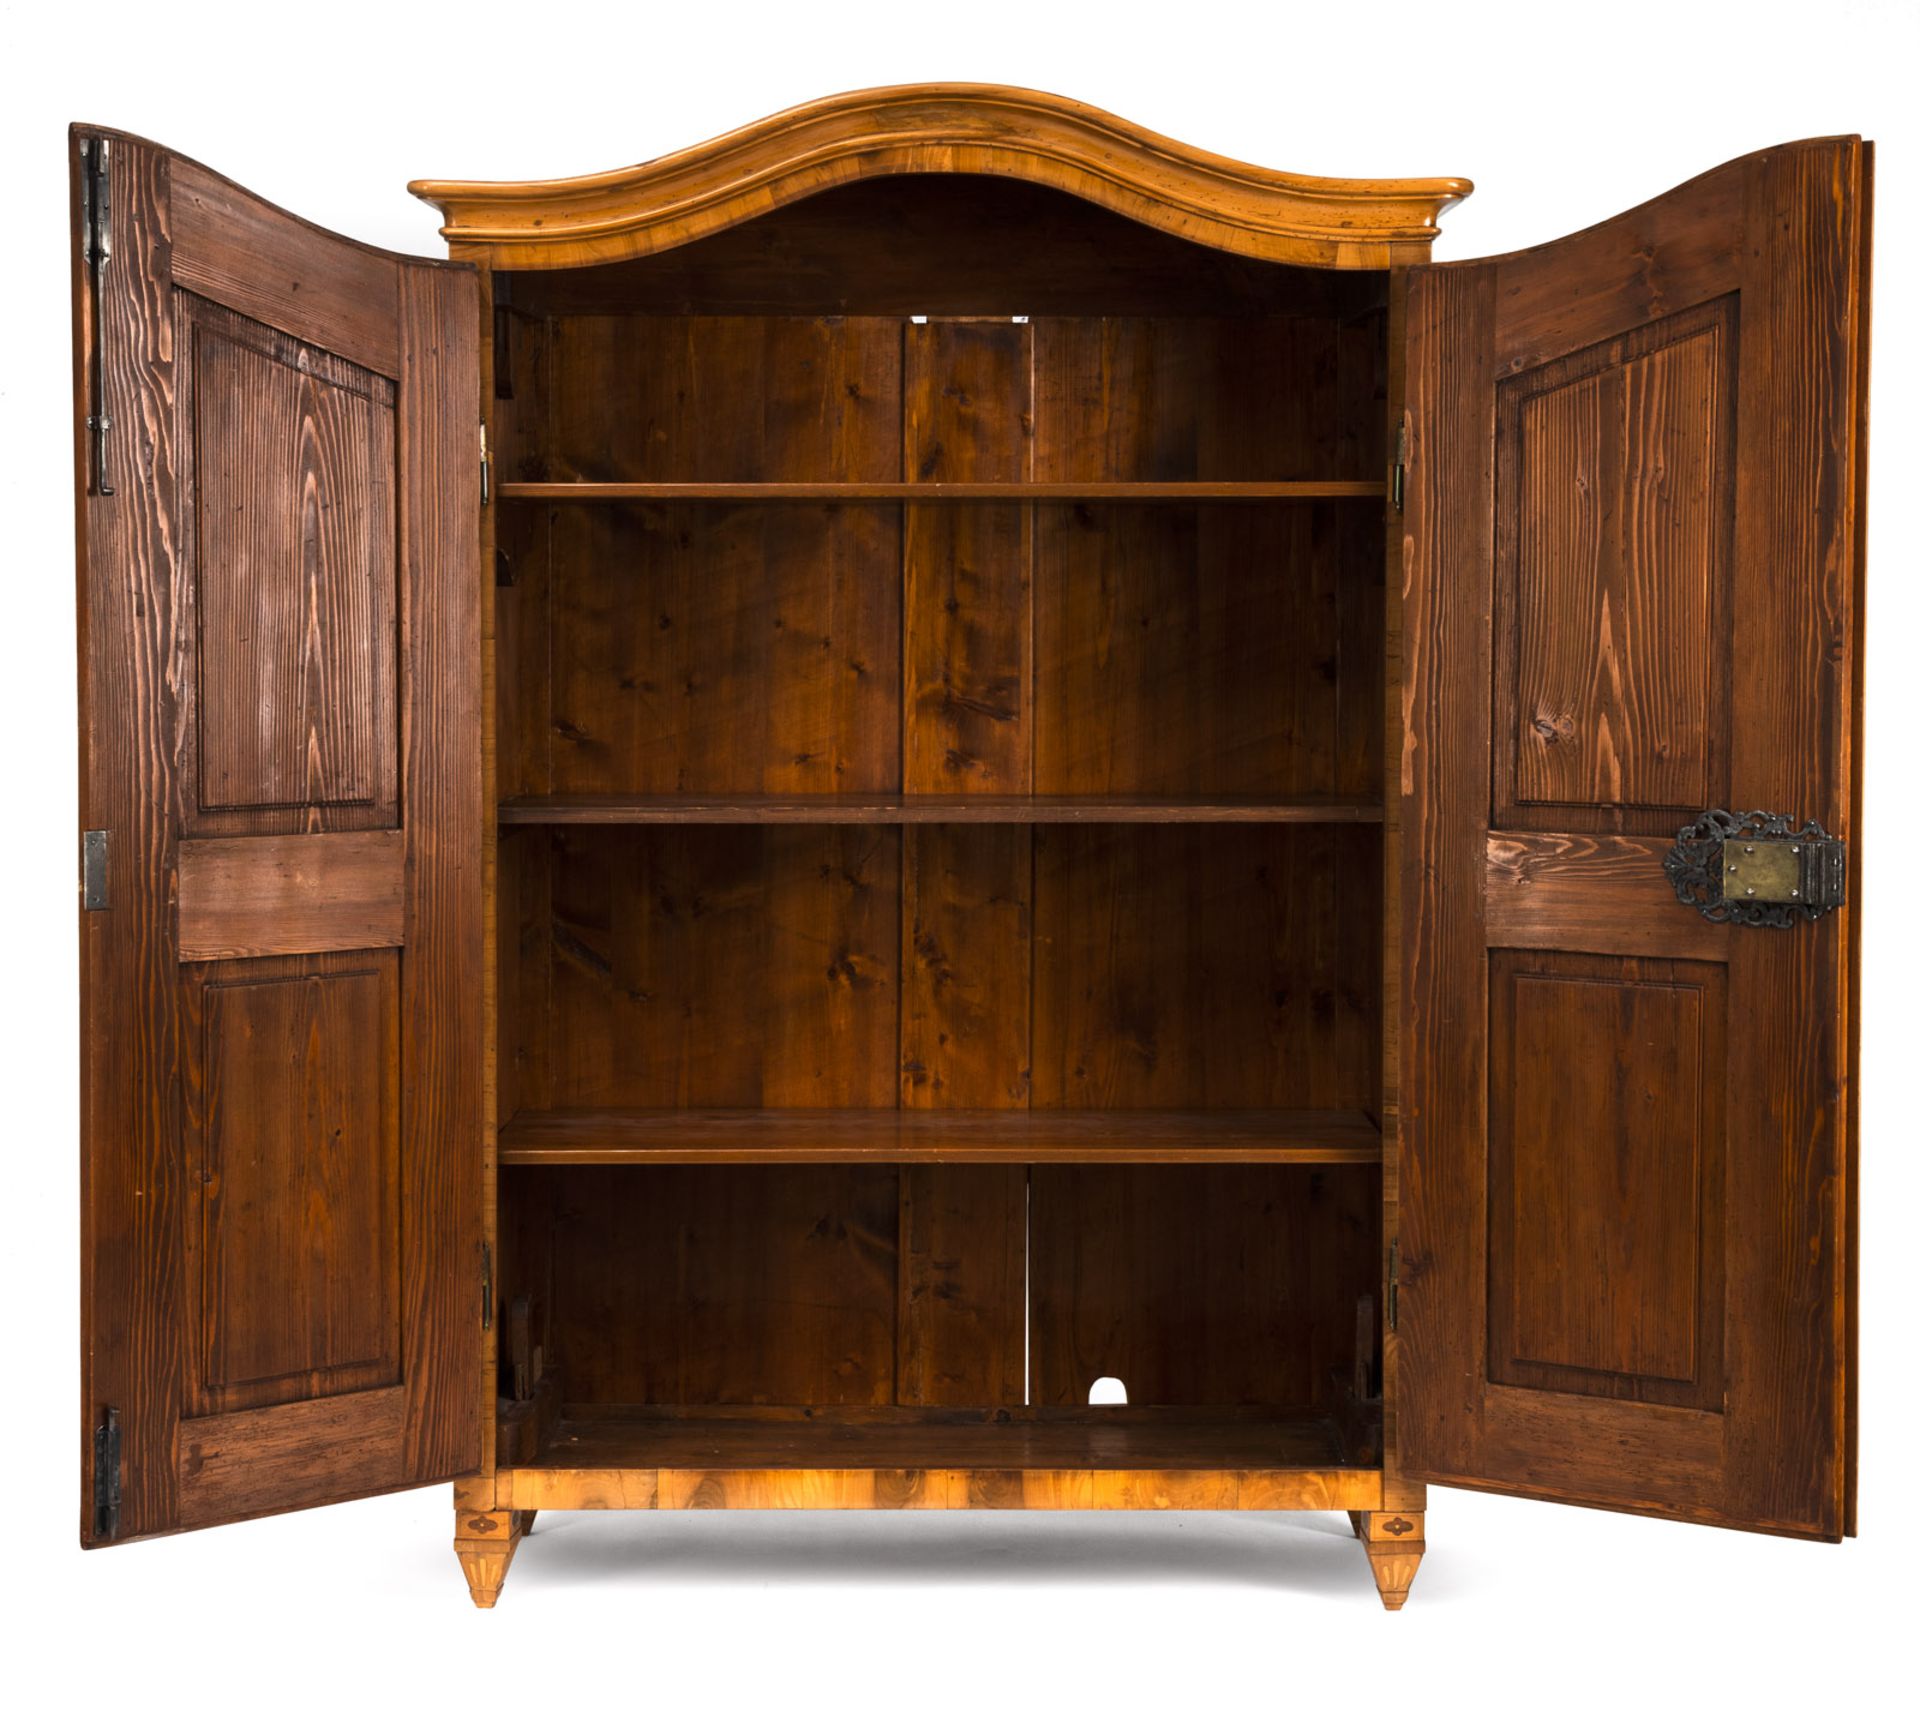 AN AUSTRIAN BRASS MOUNTED WALNUT AND MARQUTRIED JOSEPHINIAN CUPBOARD - Image 7 of 10